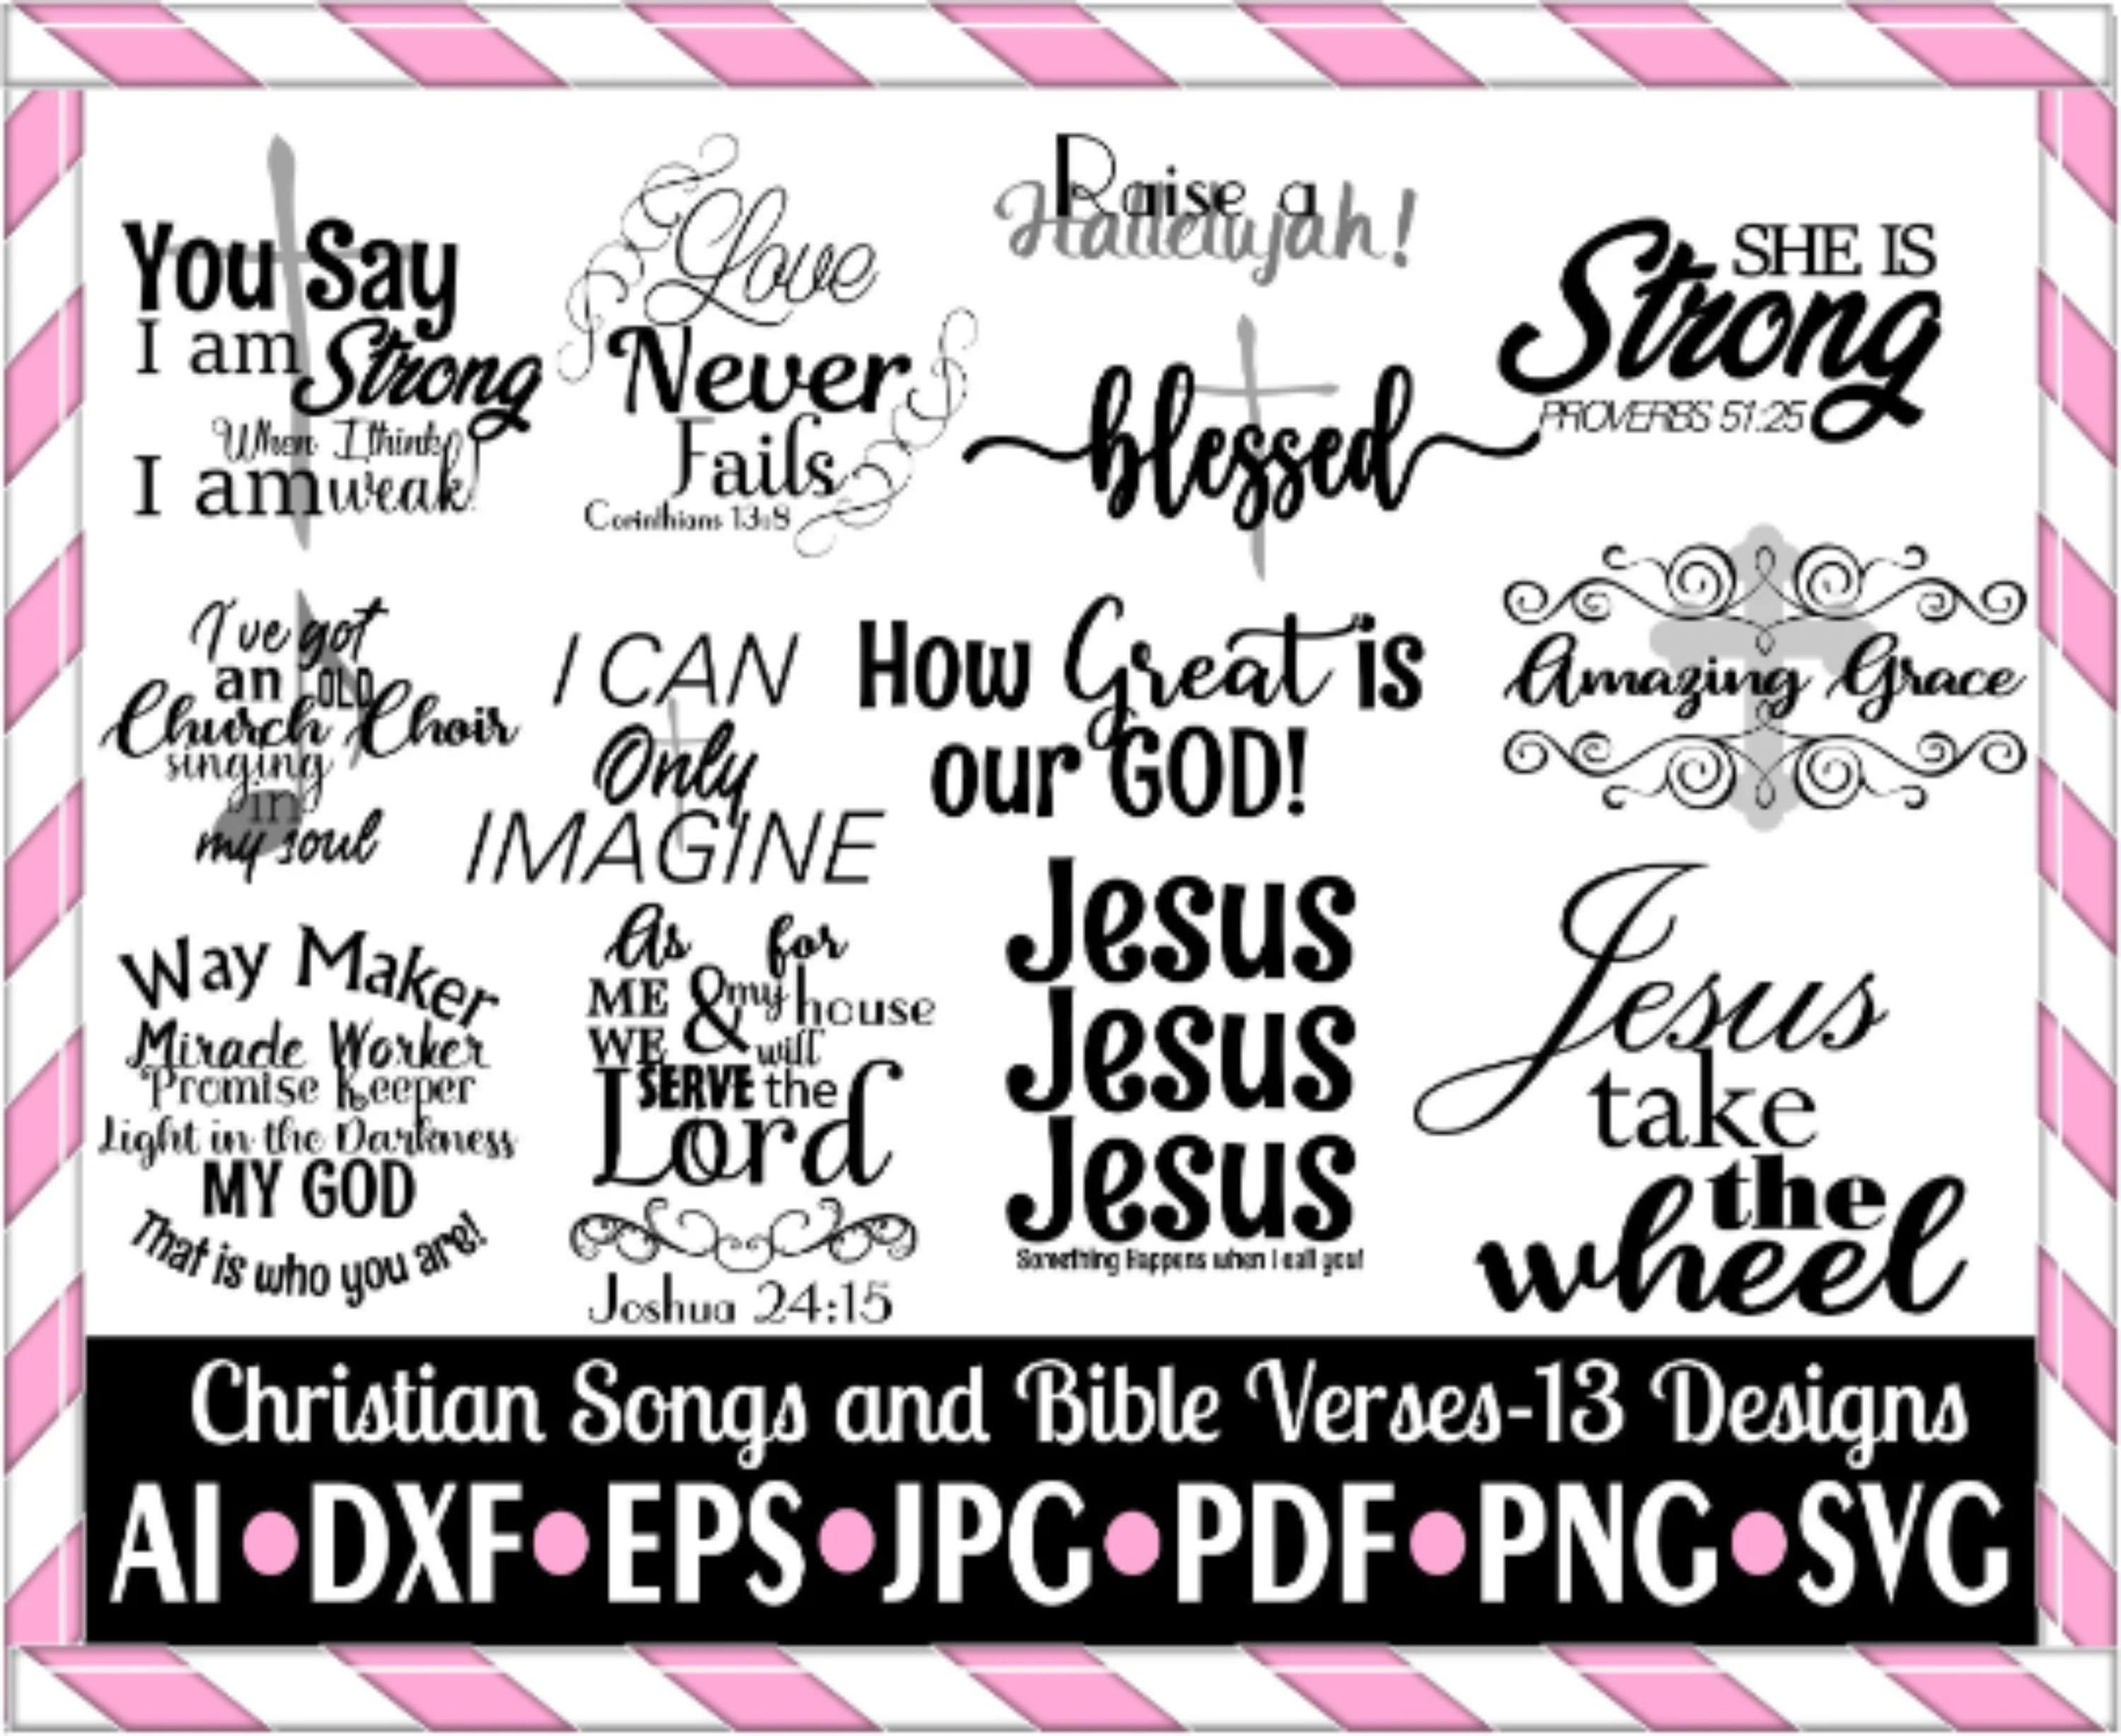 Way Maker Miracle Worker Promise Keeper Light in the Darkness, My God That  is Who You Are svg, png, jpg, pdf, eps, dxf, ai